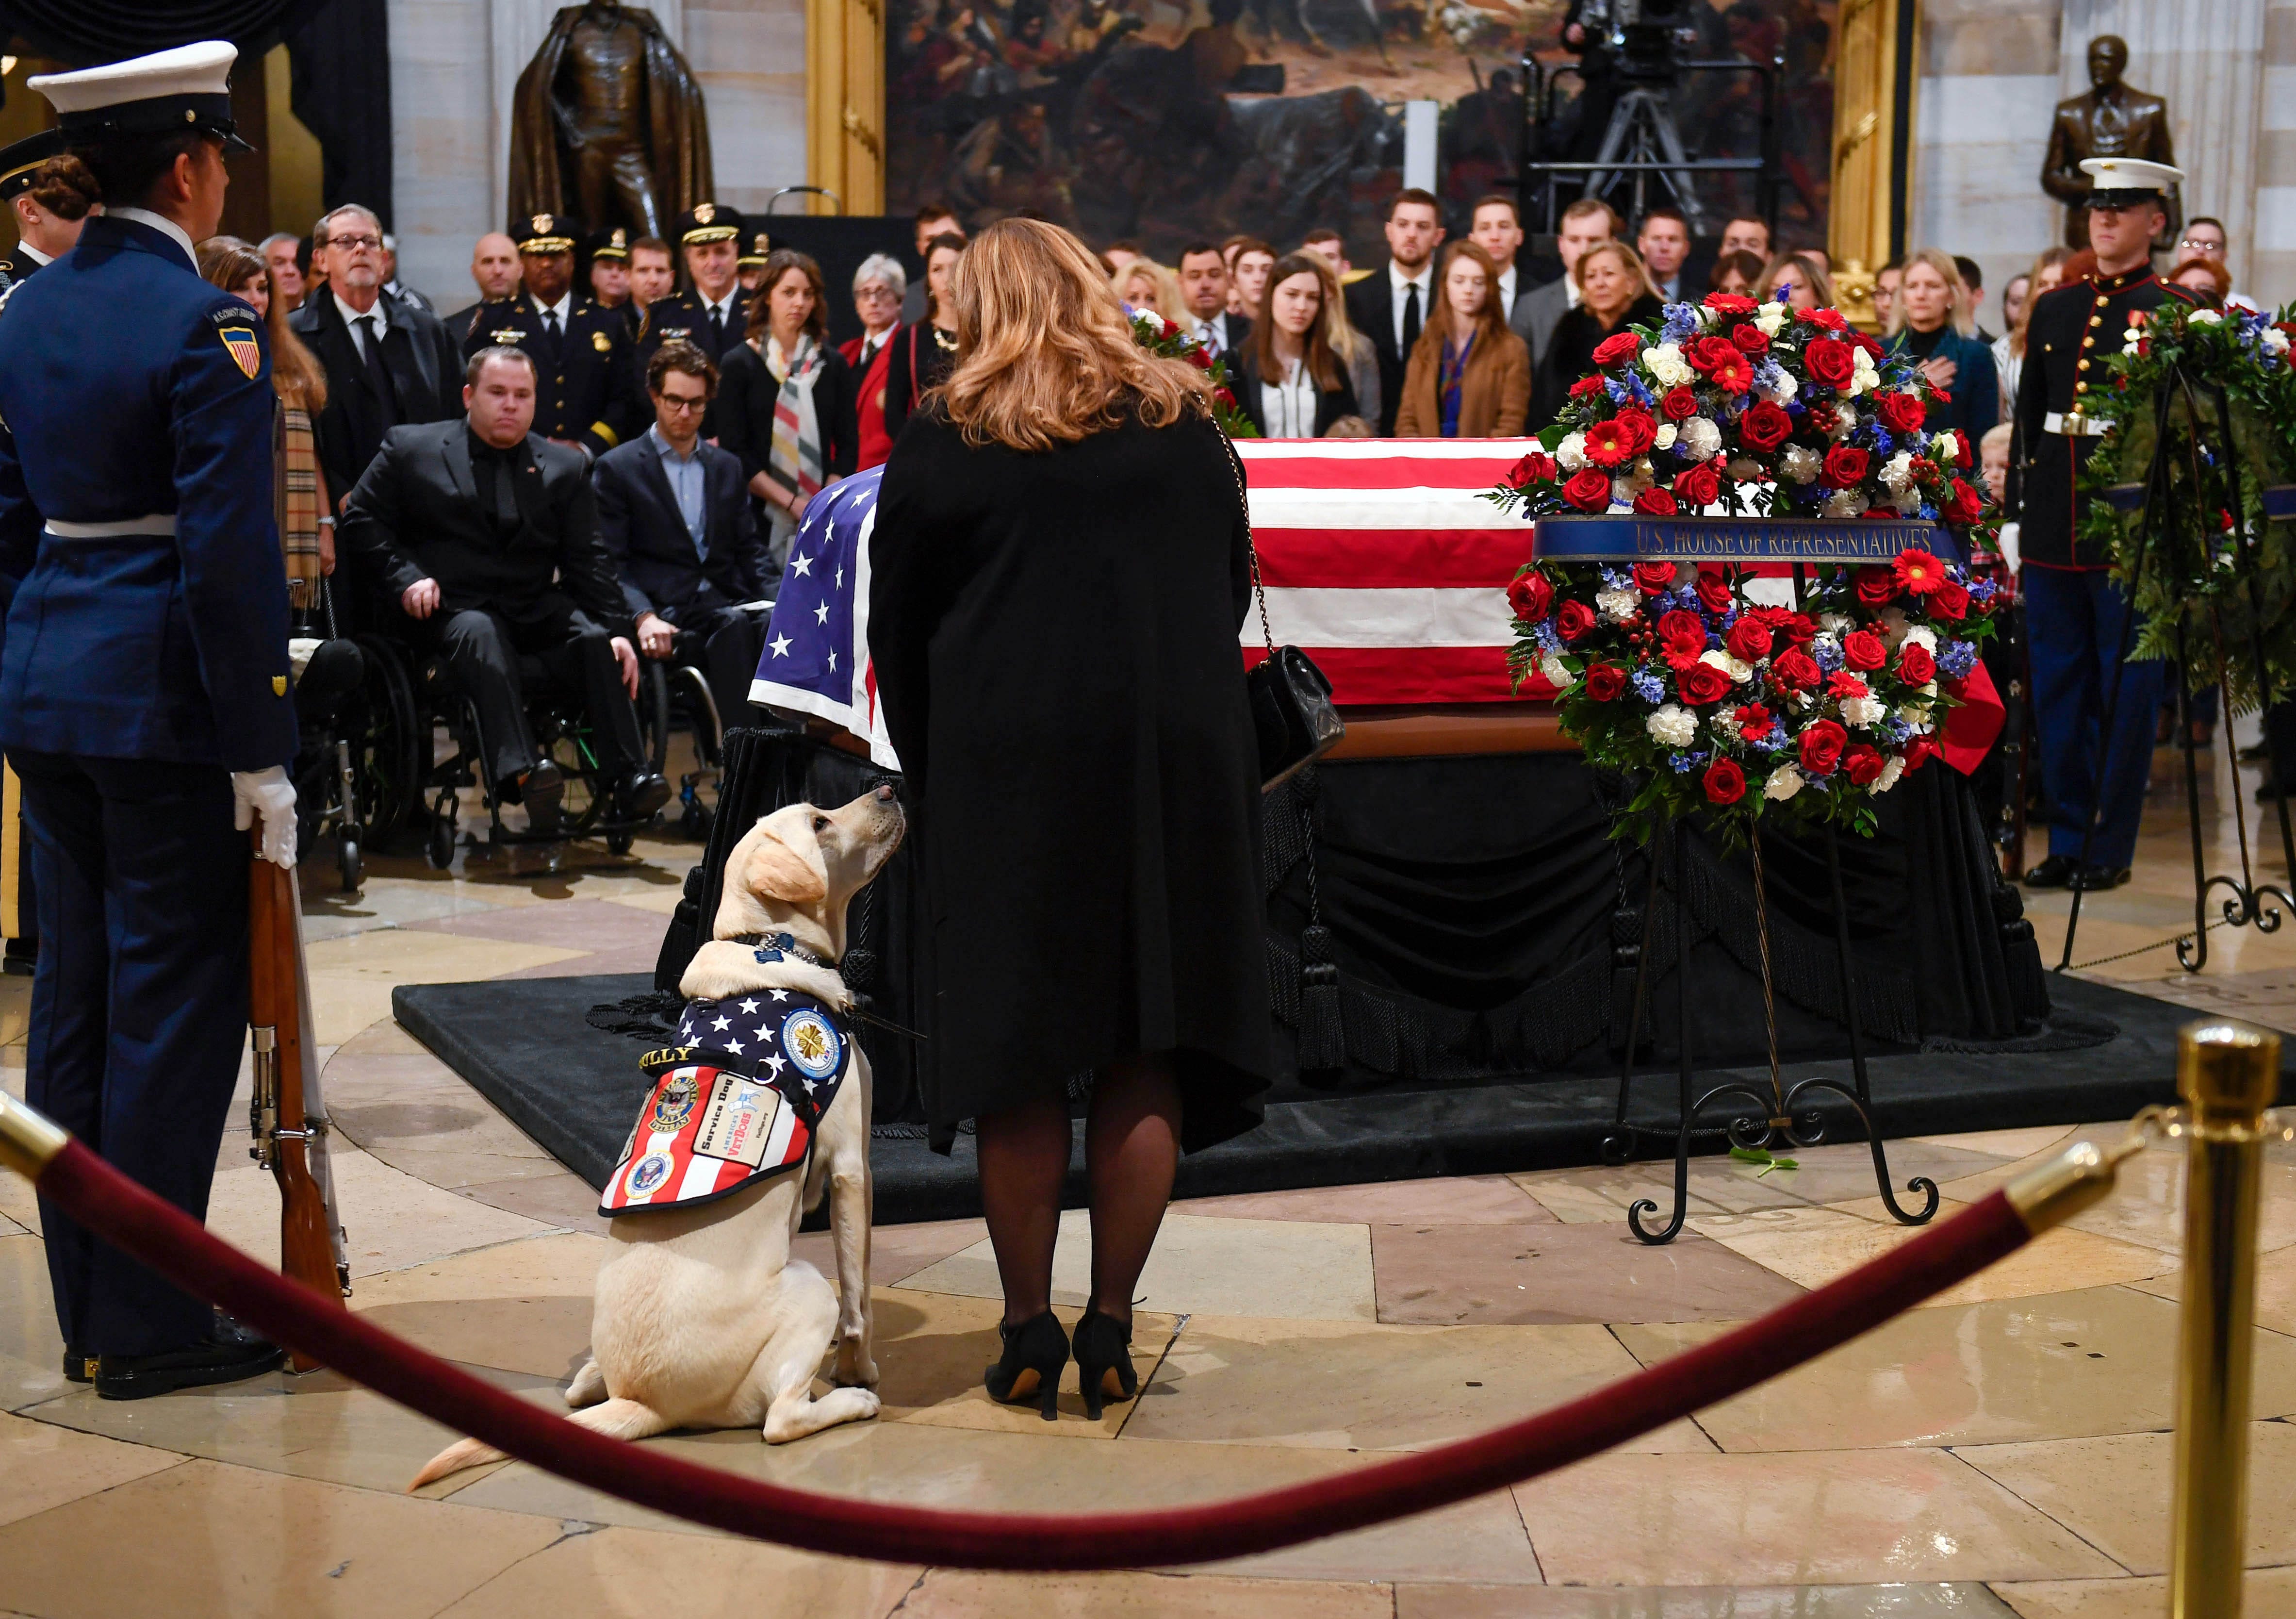 President George H.W. Bush's service dog, Sully, with Valerie Cramer of America's VetDogs at the U.S. Capitol to honor late president on Dec. 4, 2018. Sully, a service dog trained by America's VetDogs, will join Walter Reed National Military Medical Center's Facility Dog Program after the holidays. Bush regarded Sully as a "beautiful" and obedient companion since he joined his family in June.  Sully followed Bush's casket to Joint Base Andrews in Maryland. After he says his goodbyes.